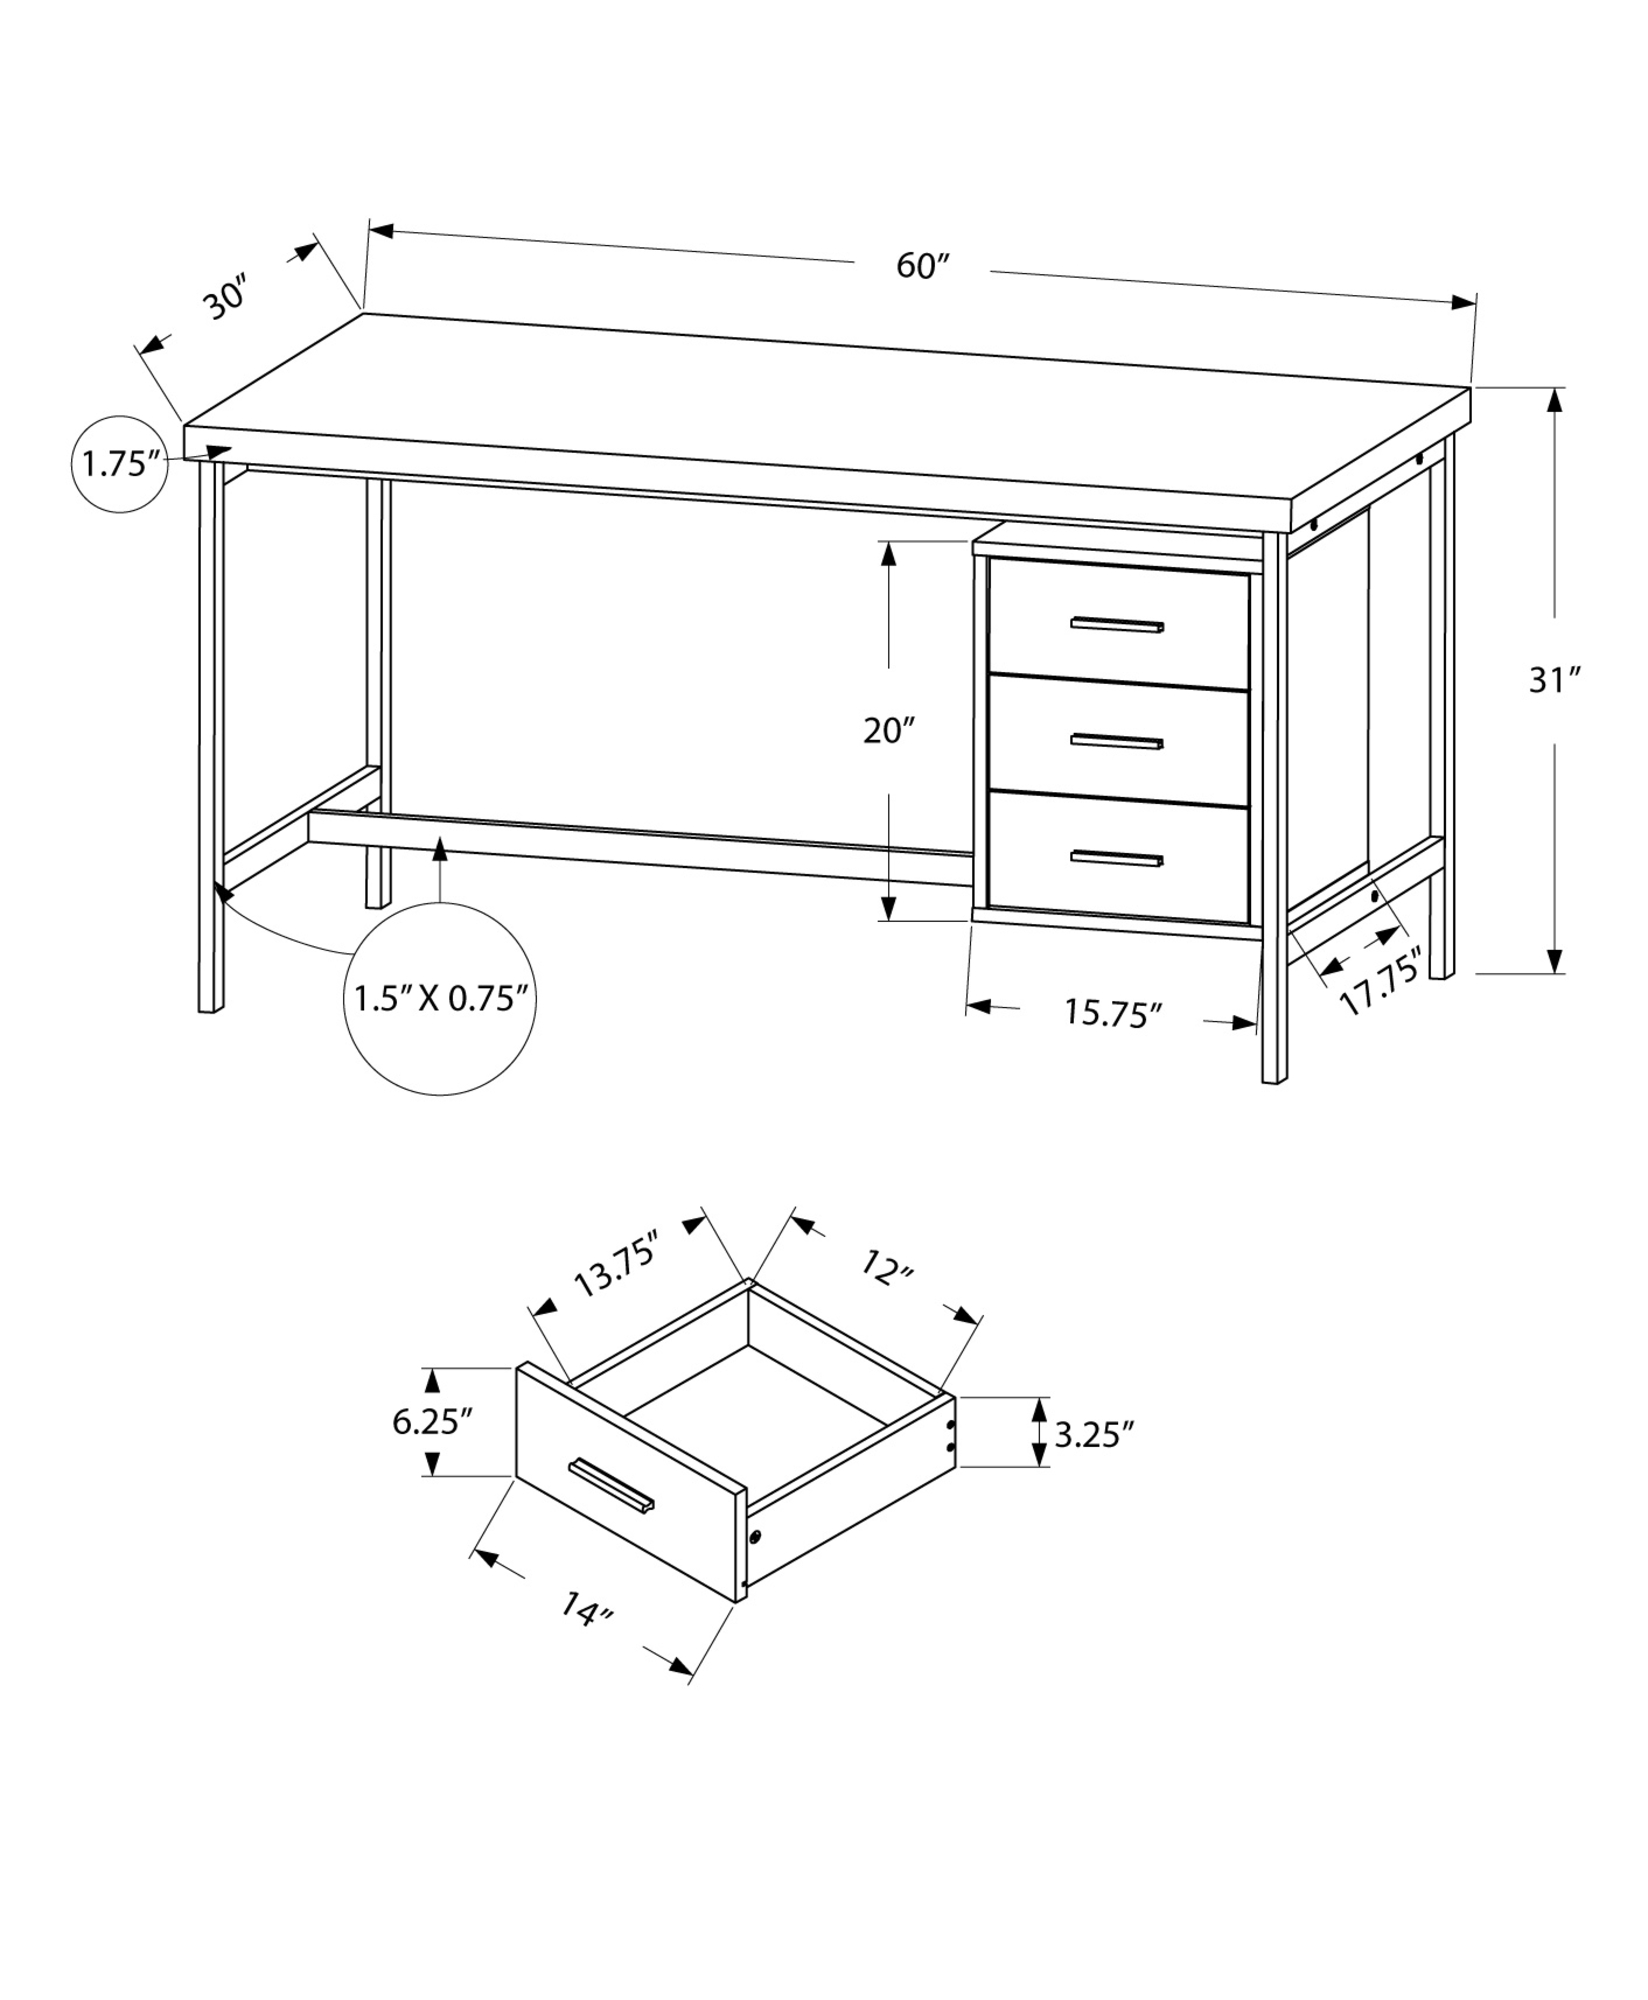 30" x 60" x 31" White Silver Particle Board Hollow Core Metal Computer Desk With A Hollow Core